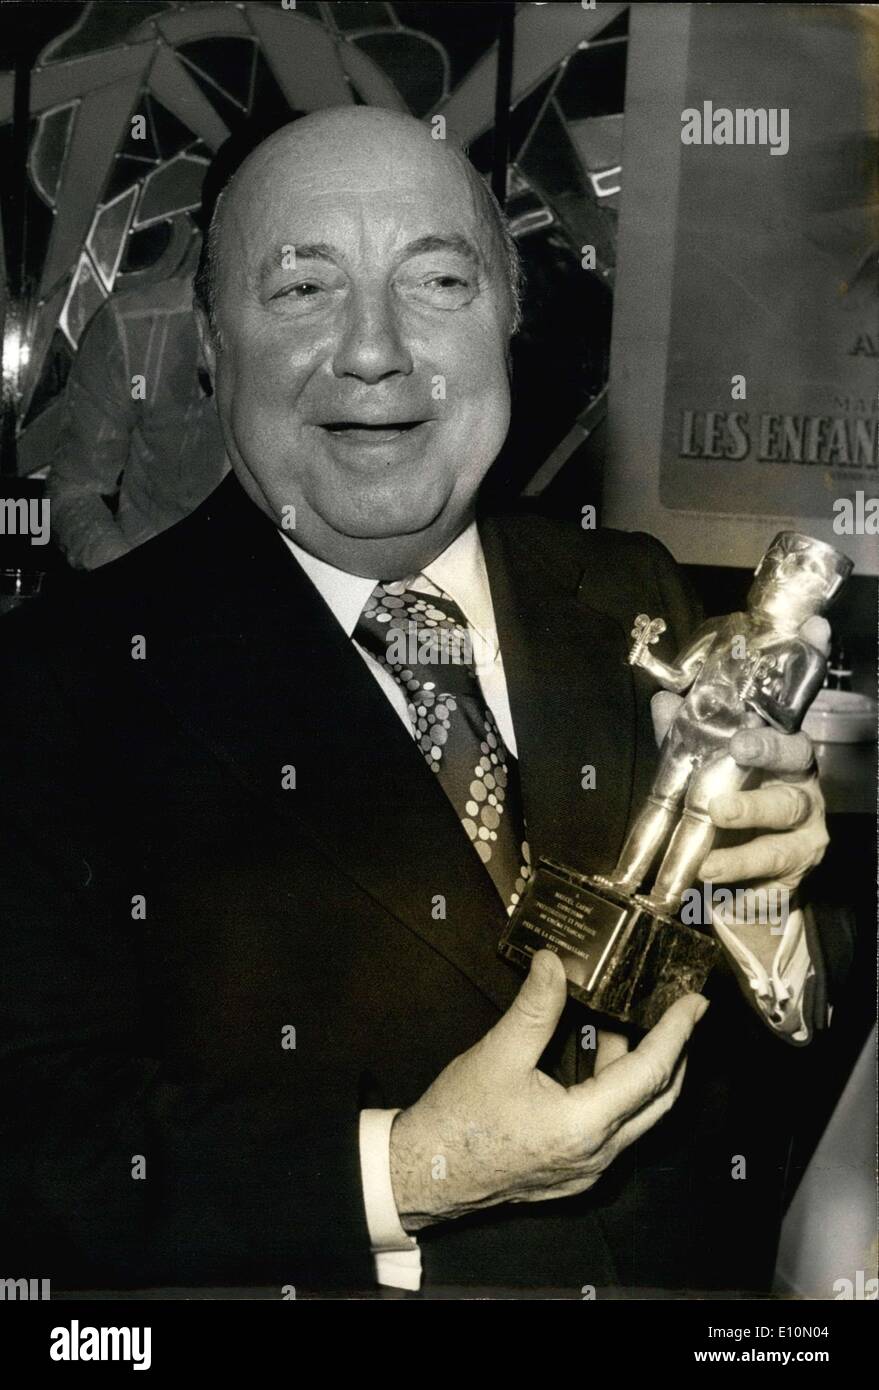 Jun. 30, 1973 - During a party held in a private Parisian club in honor of Marcel Carne, the famous movie producer was given ''The Recognition Prize,'' presented by all the movie goers to the author of ''Children of Paradise''. Here, Carne shows off his gold and silver trophy, a faithful reproduction of a ancient pre-Columbian idol representing the ''God of Power' Stock Photo